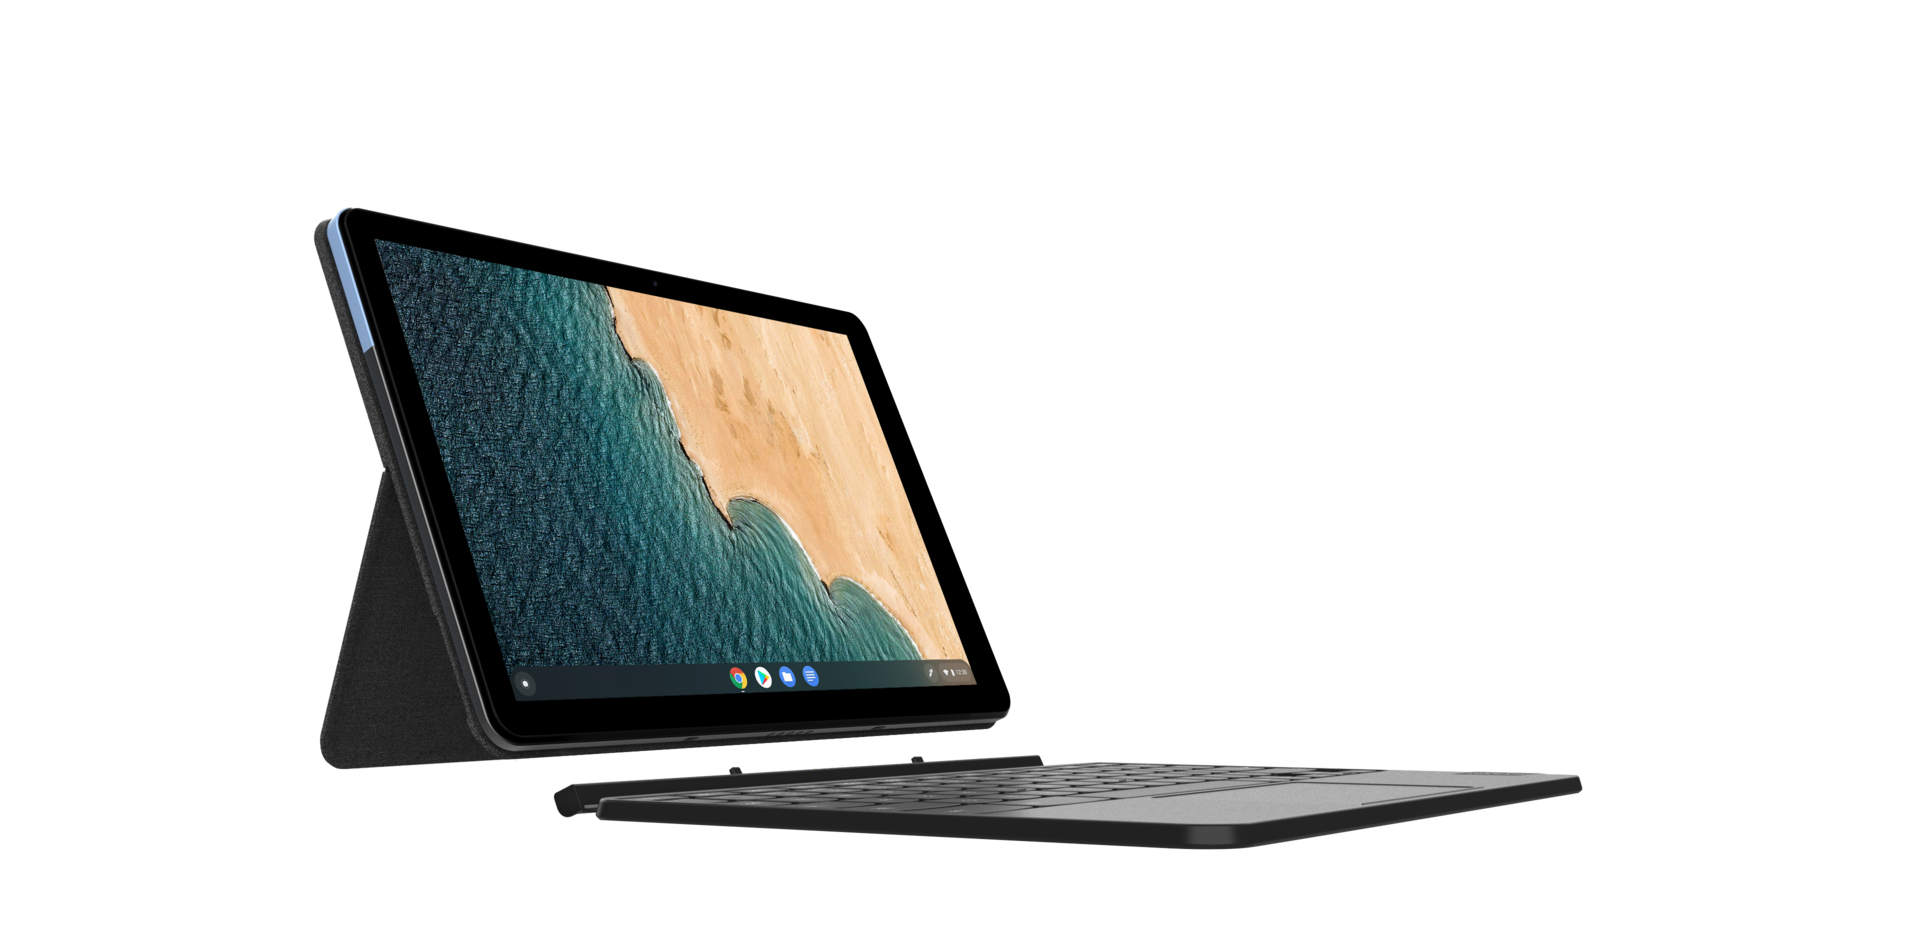 Lenovo debuts two new Chromebooks: IdeaPad Duet tablet and IdeaPad Flex 5 - NotebookCheck.net News